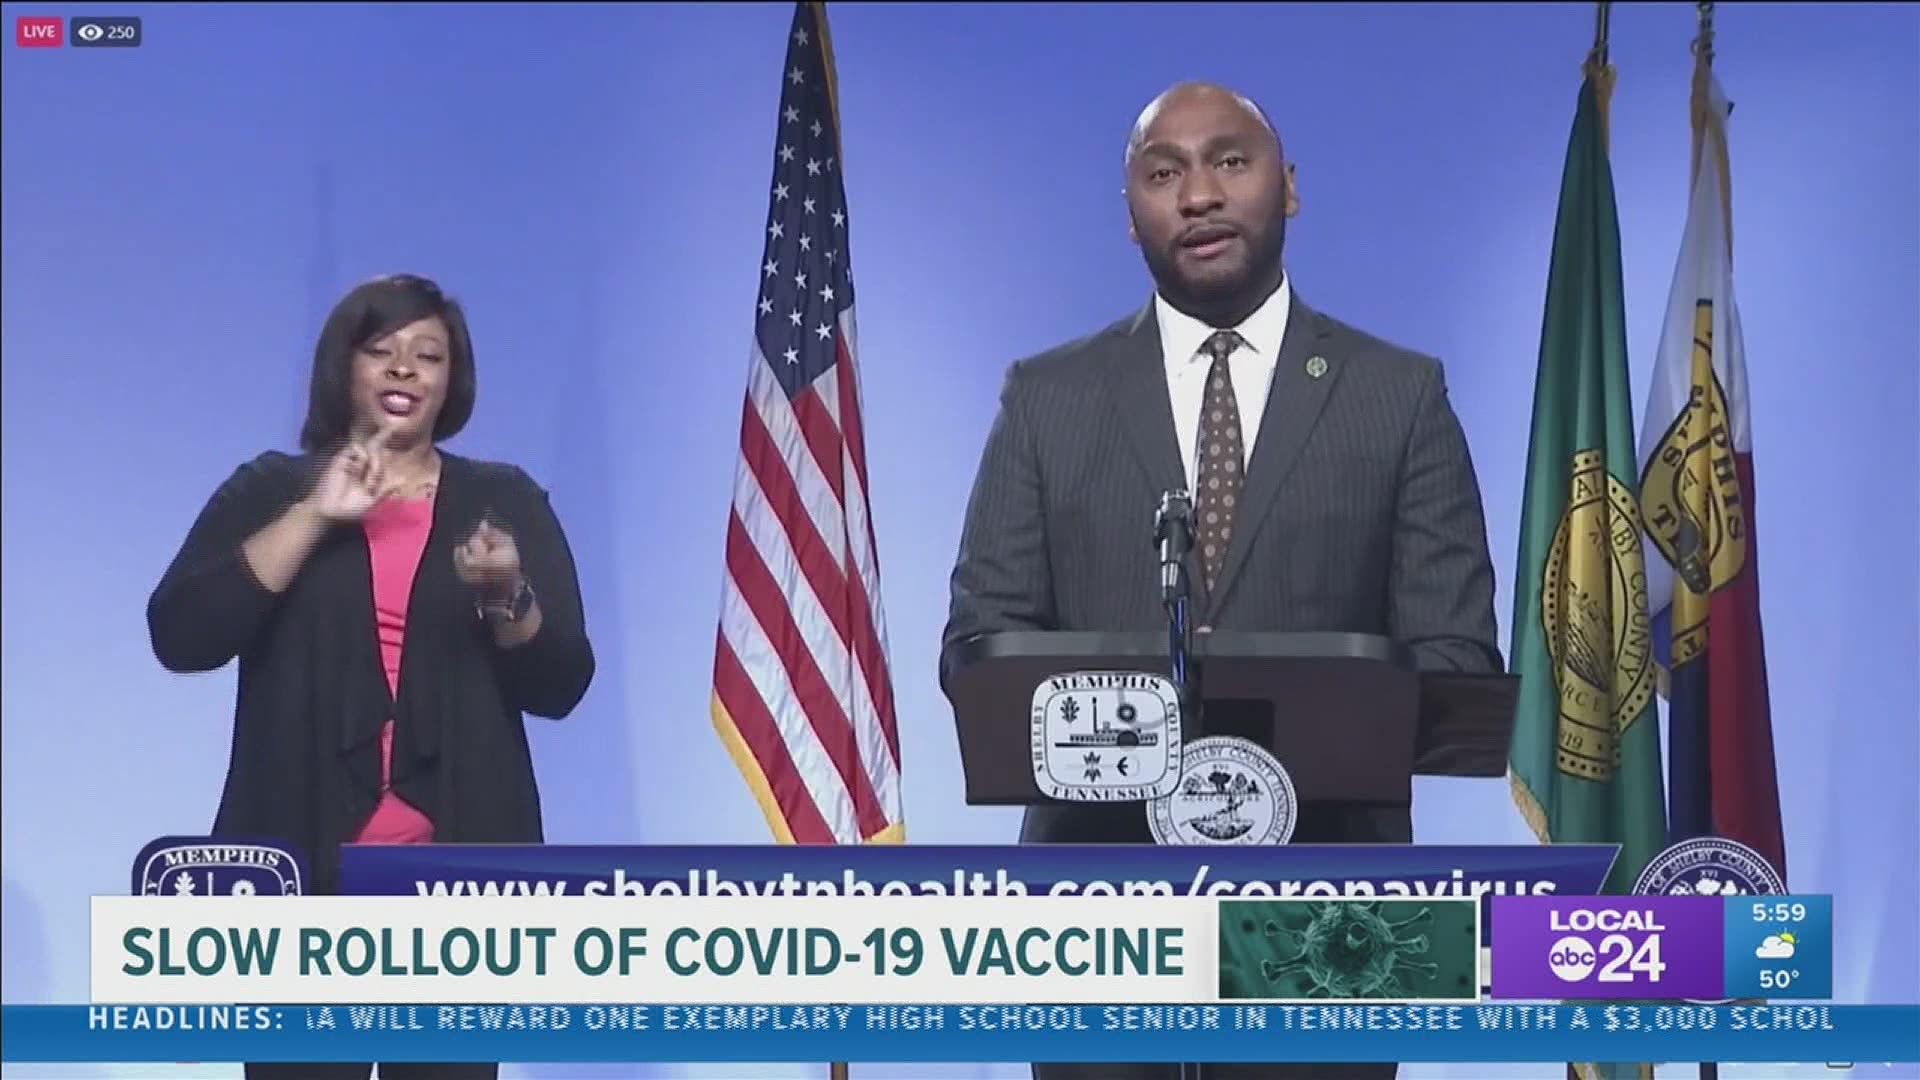 Shelby County Mayor Lee Harris said just 90,000 vaccines a week will be delivered to the entire state of Tennessee.